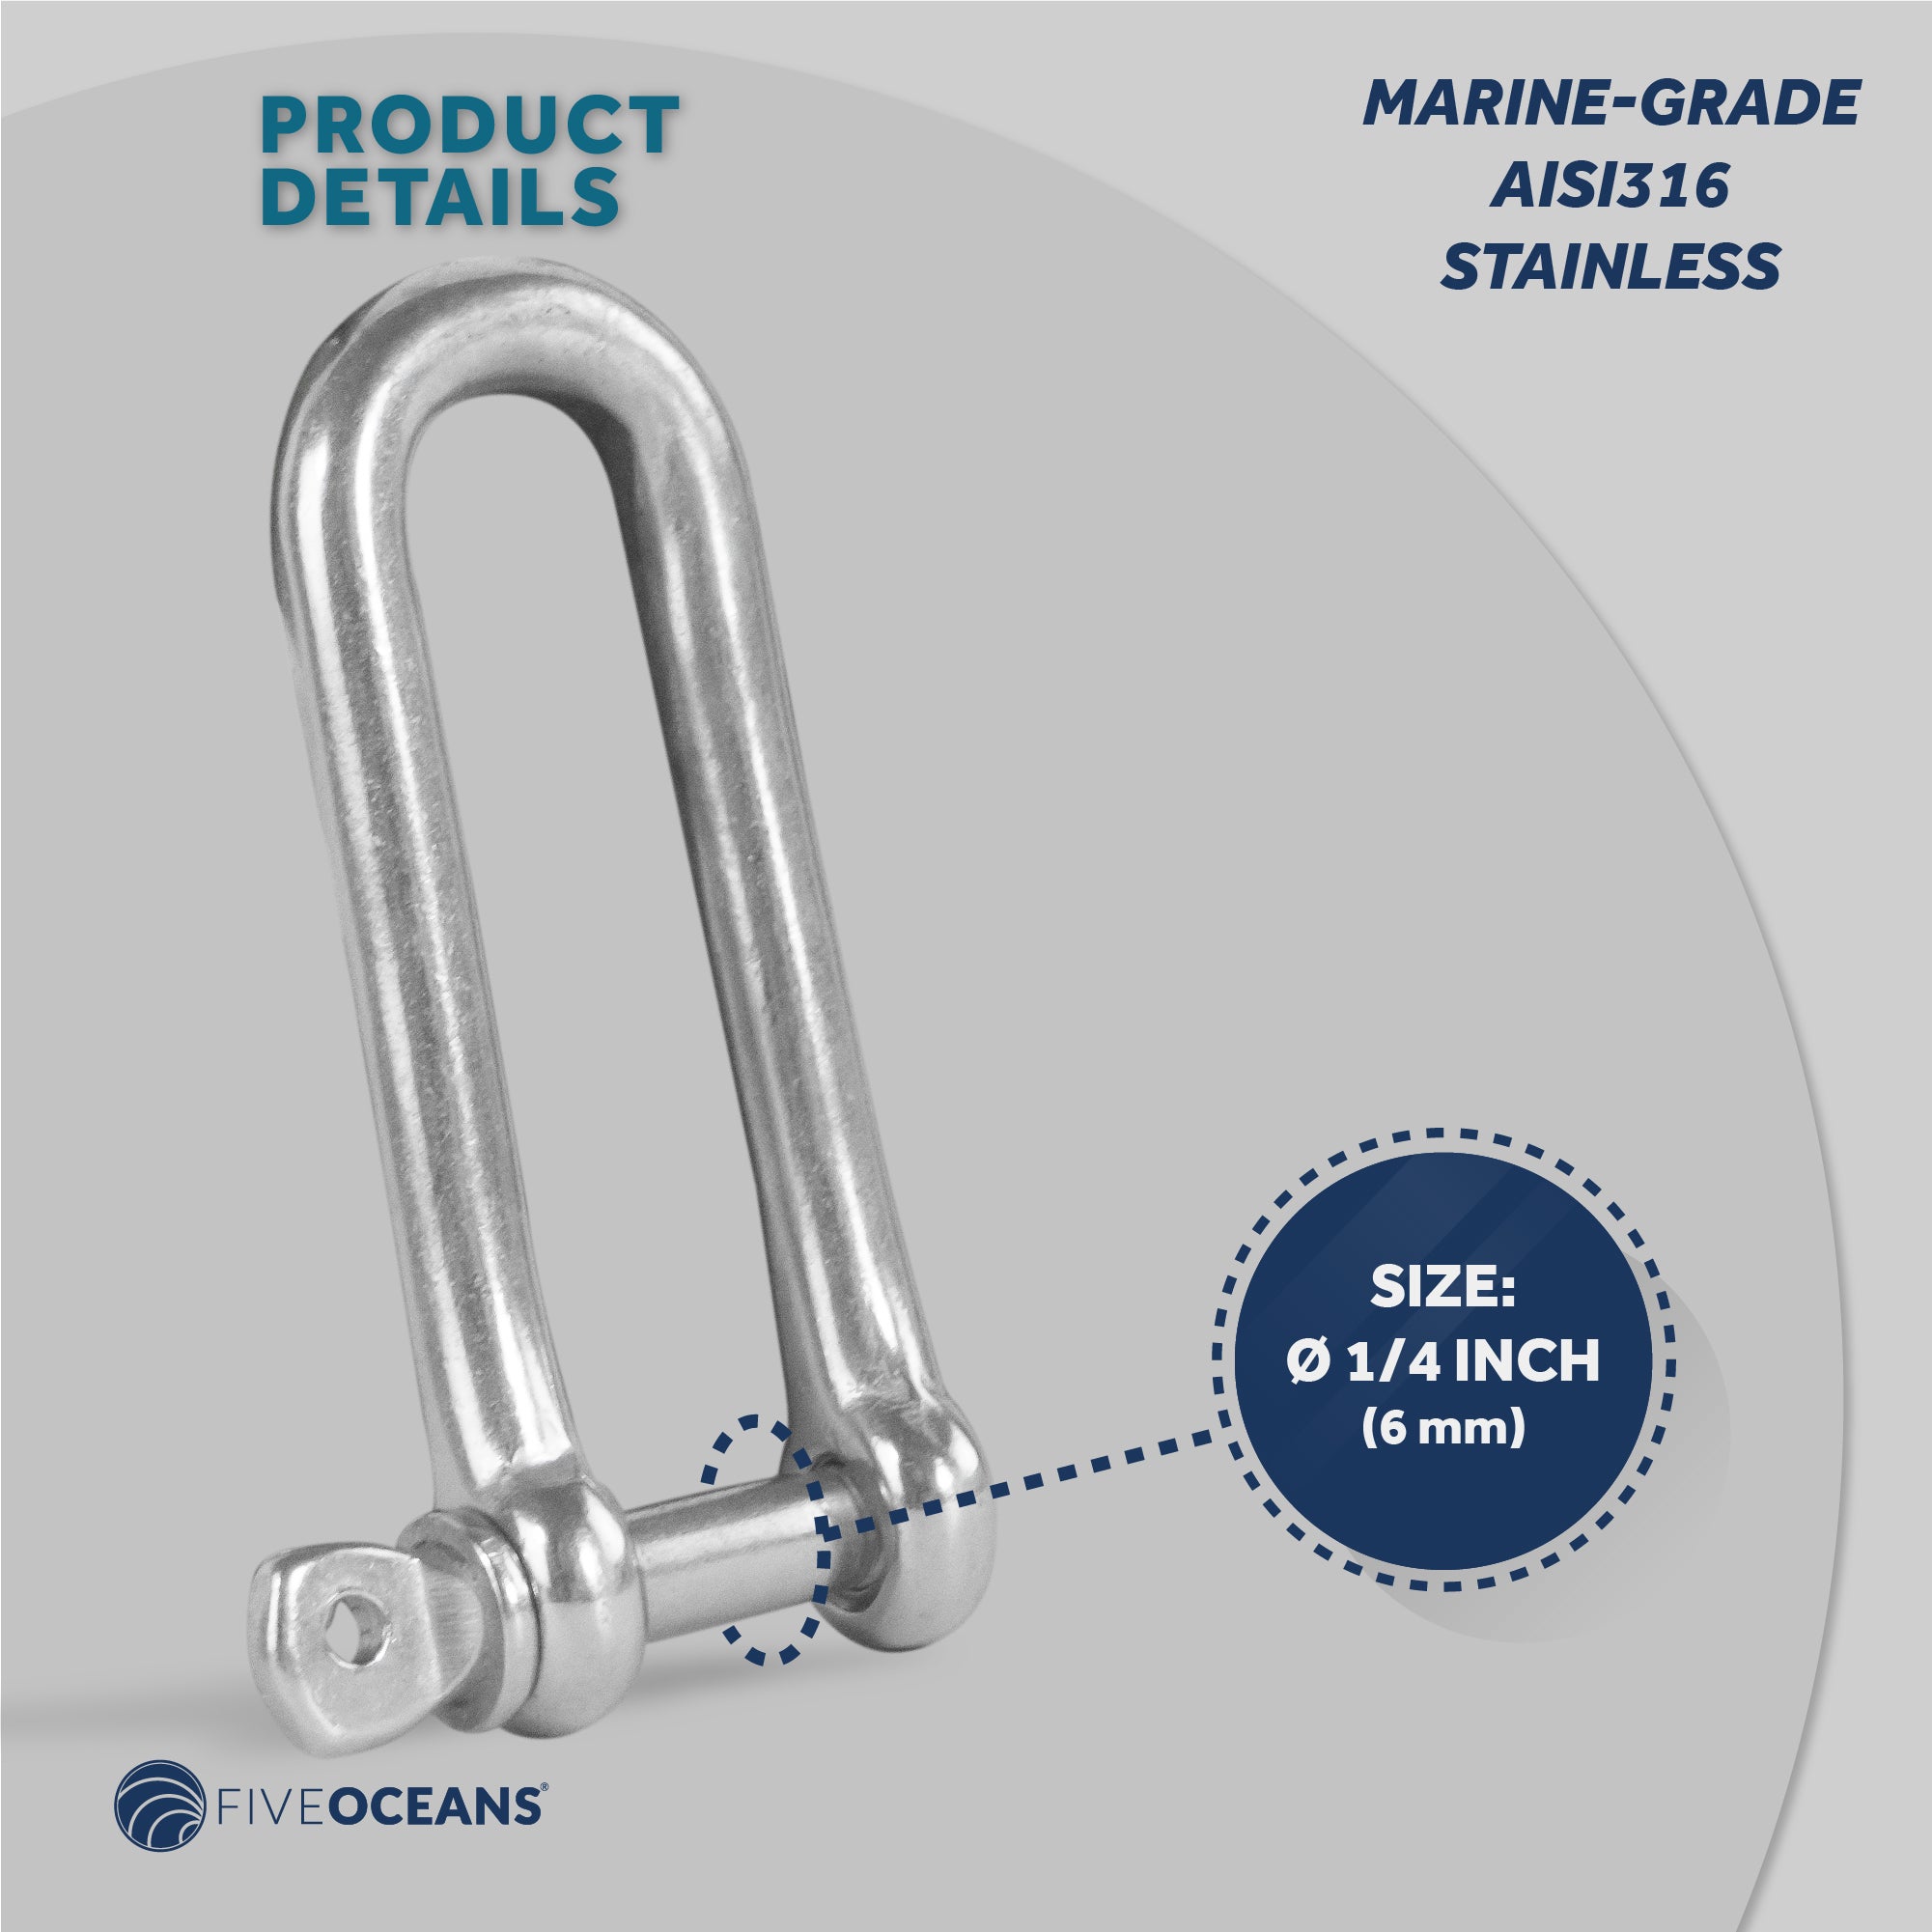 Pin Long D Shackles, 1/4" Stainless Steel - FO421